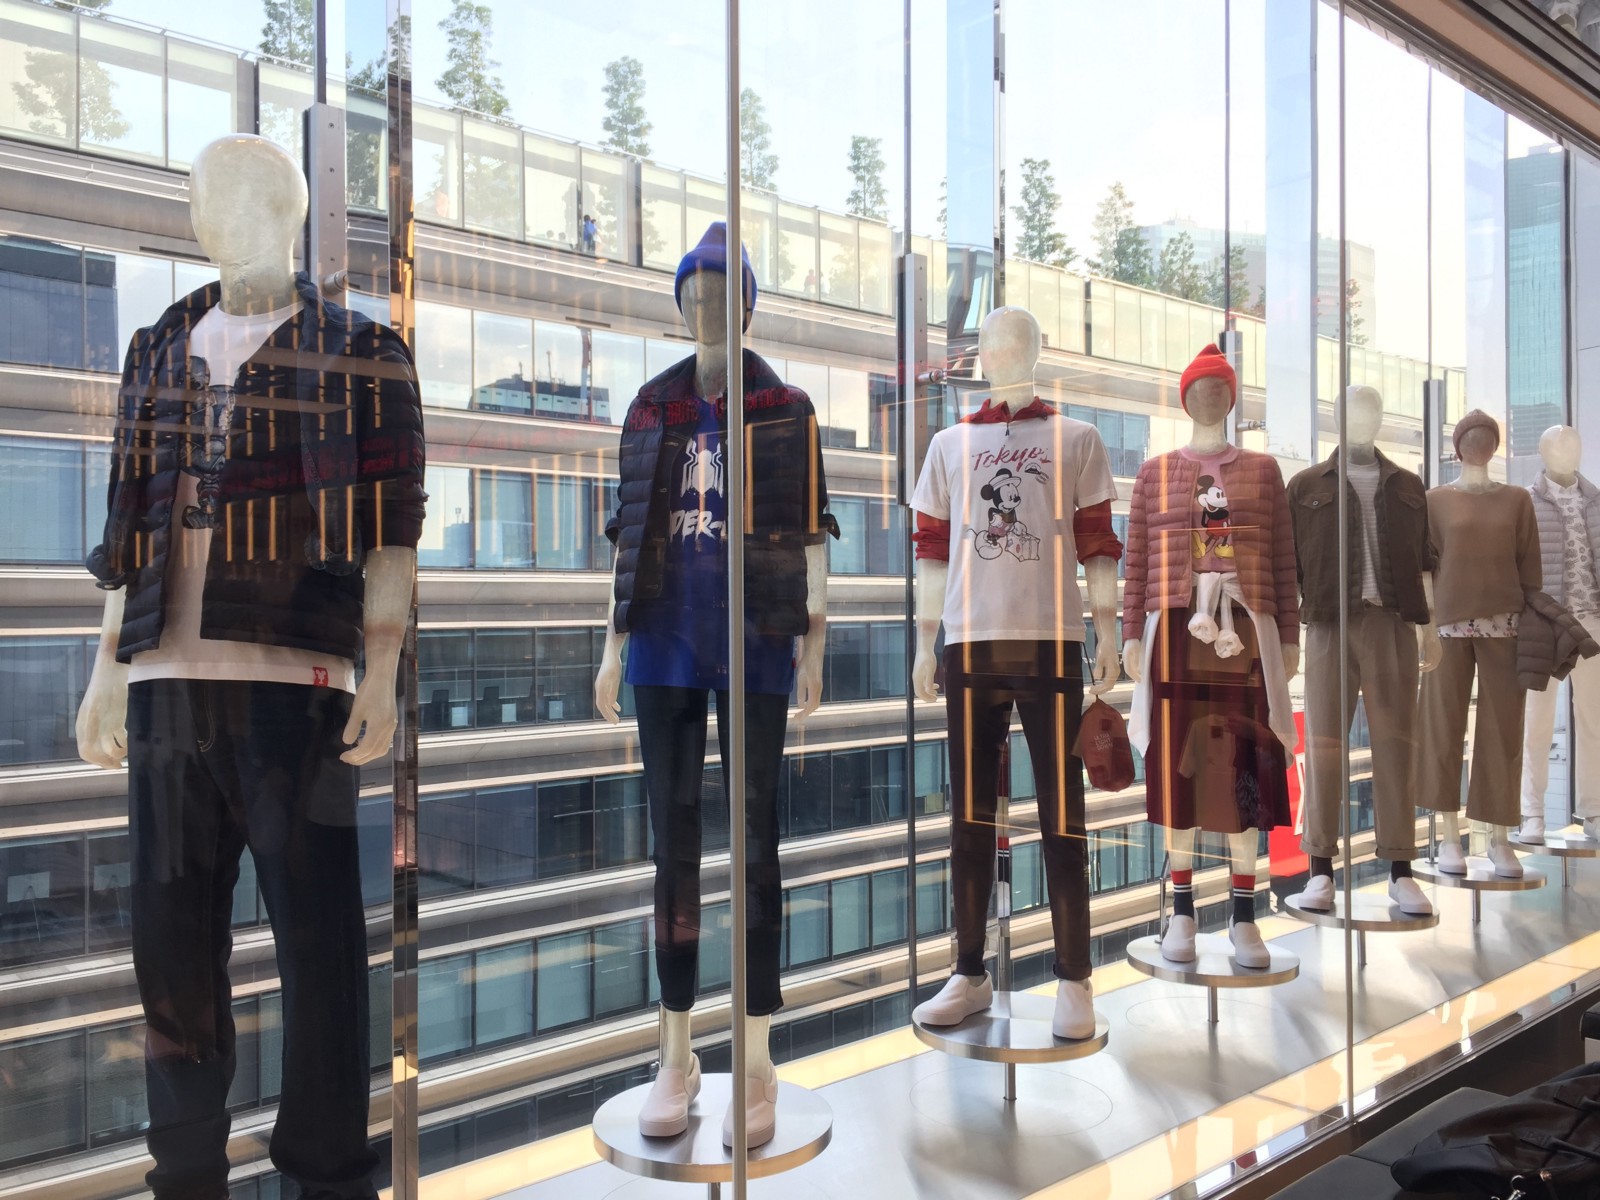 Get the Full Uniqlo Experience at Their Biggest 12-Story Flagship